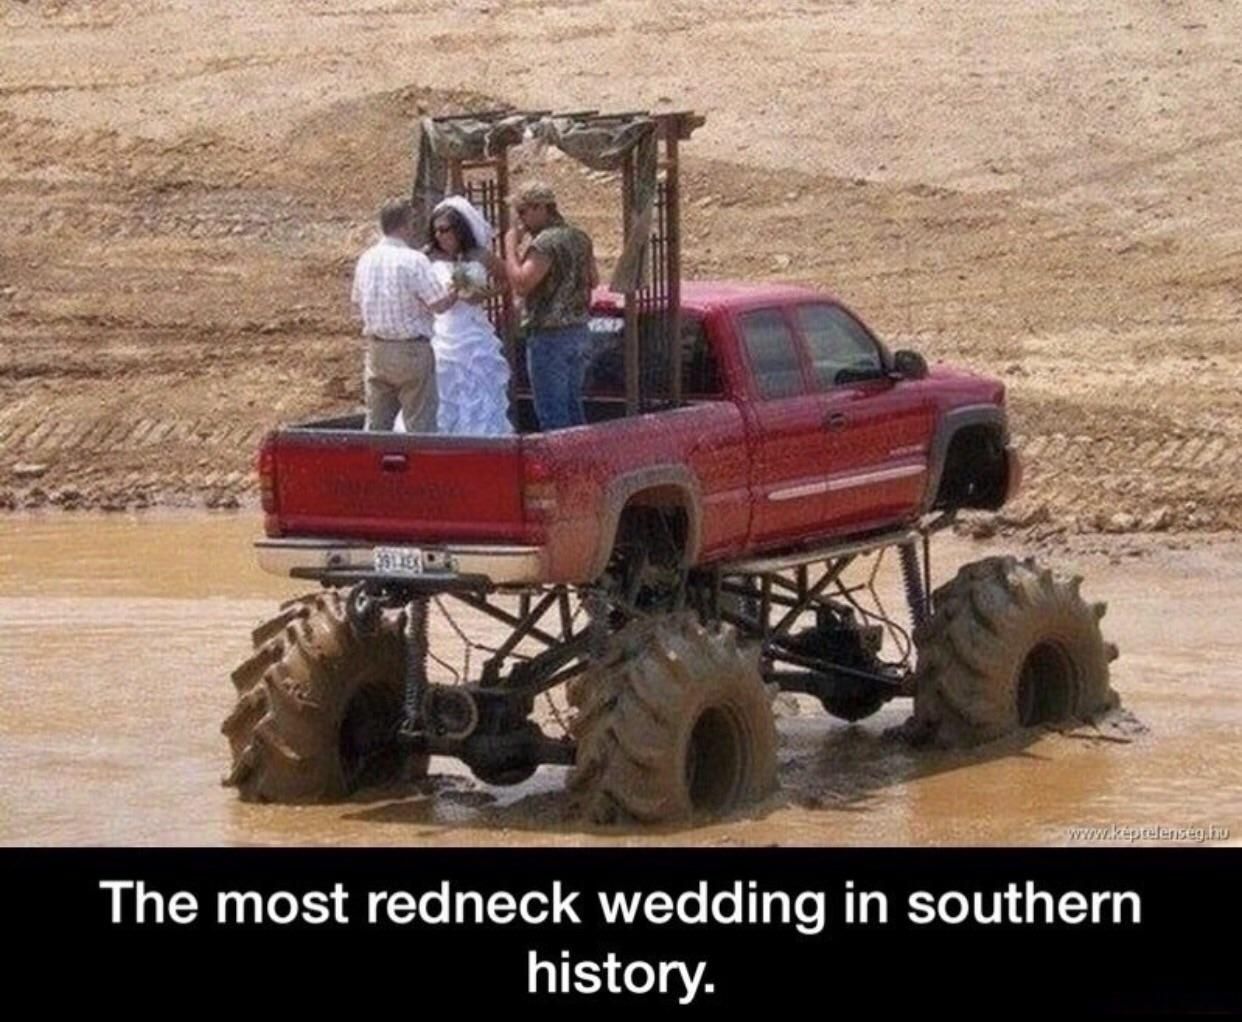 The most redneck wedding in southern history.